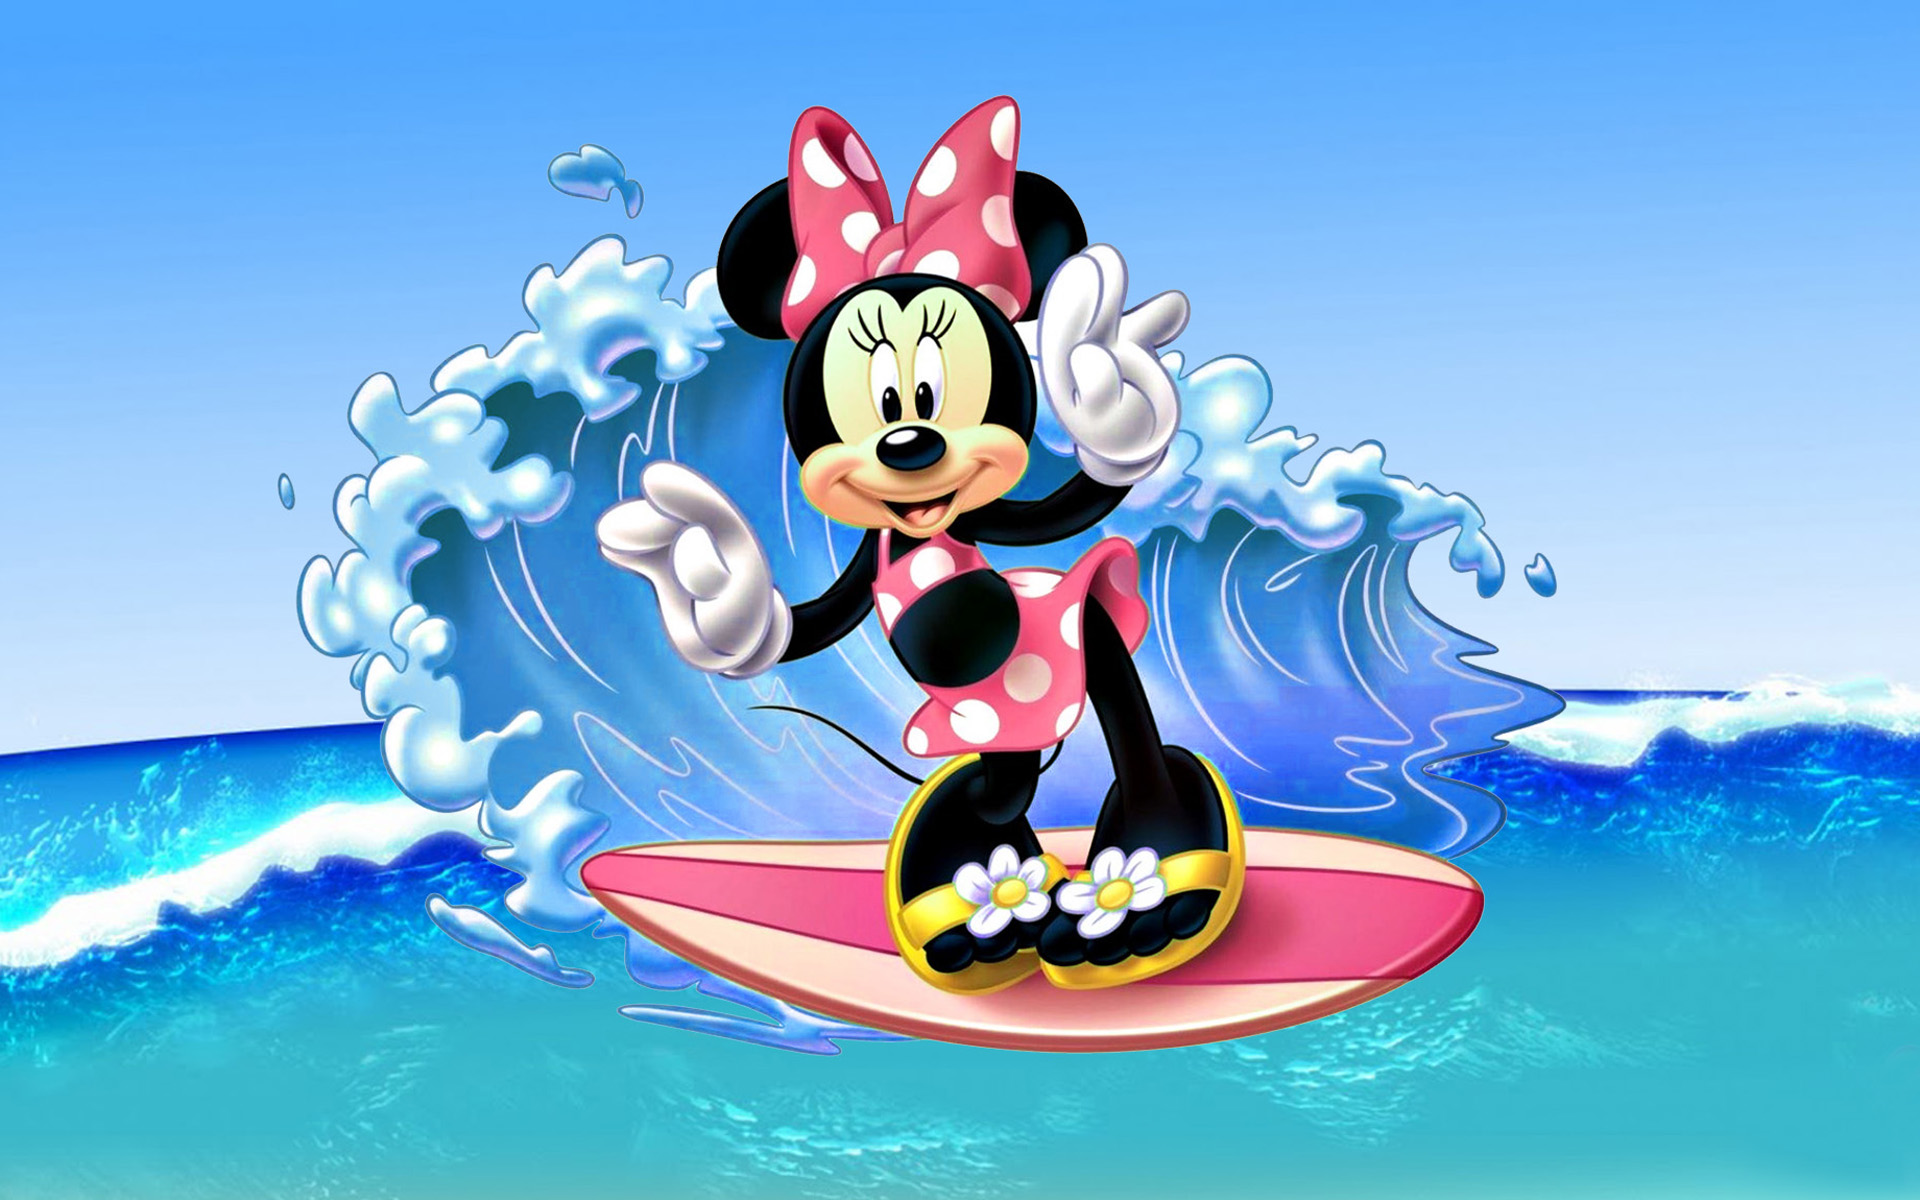 Minnie Mouse Surfing Sea Waves Image Disney Wallpaper HD